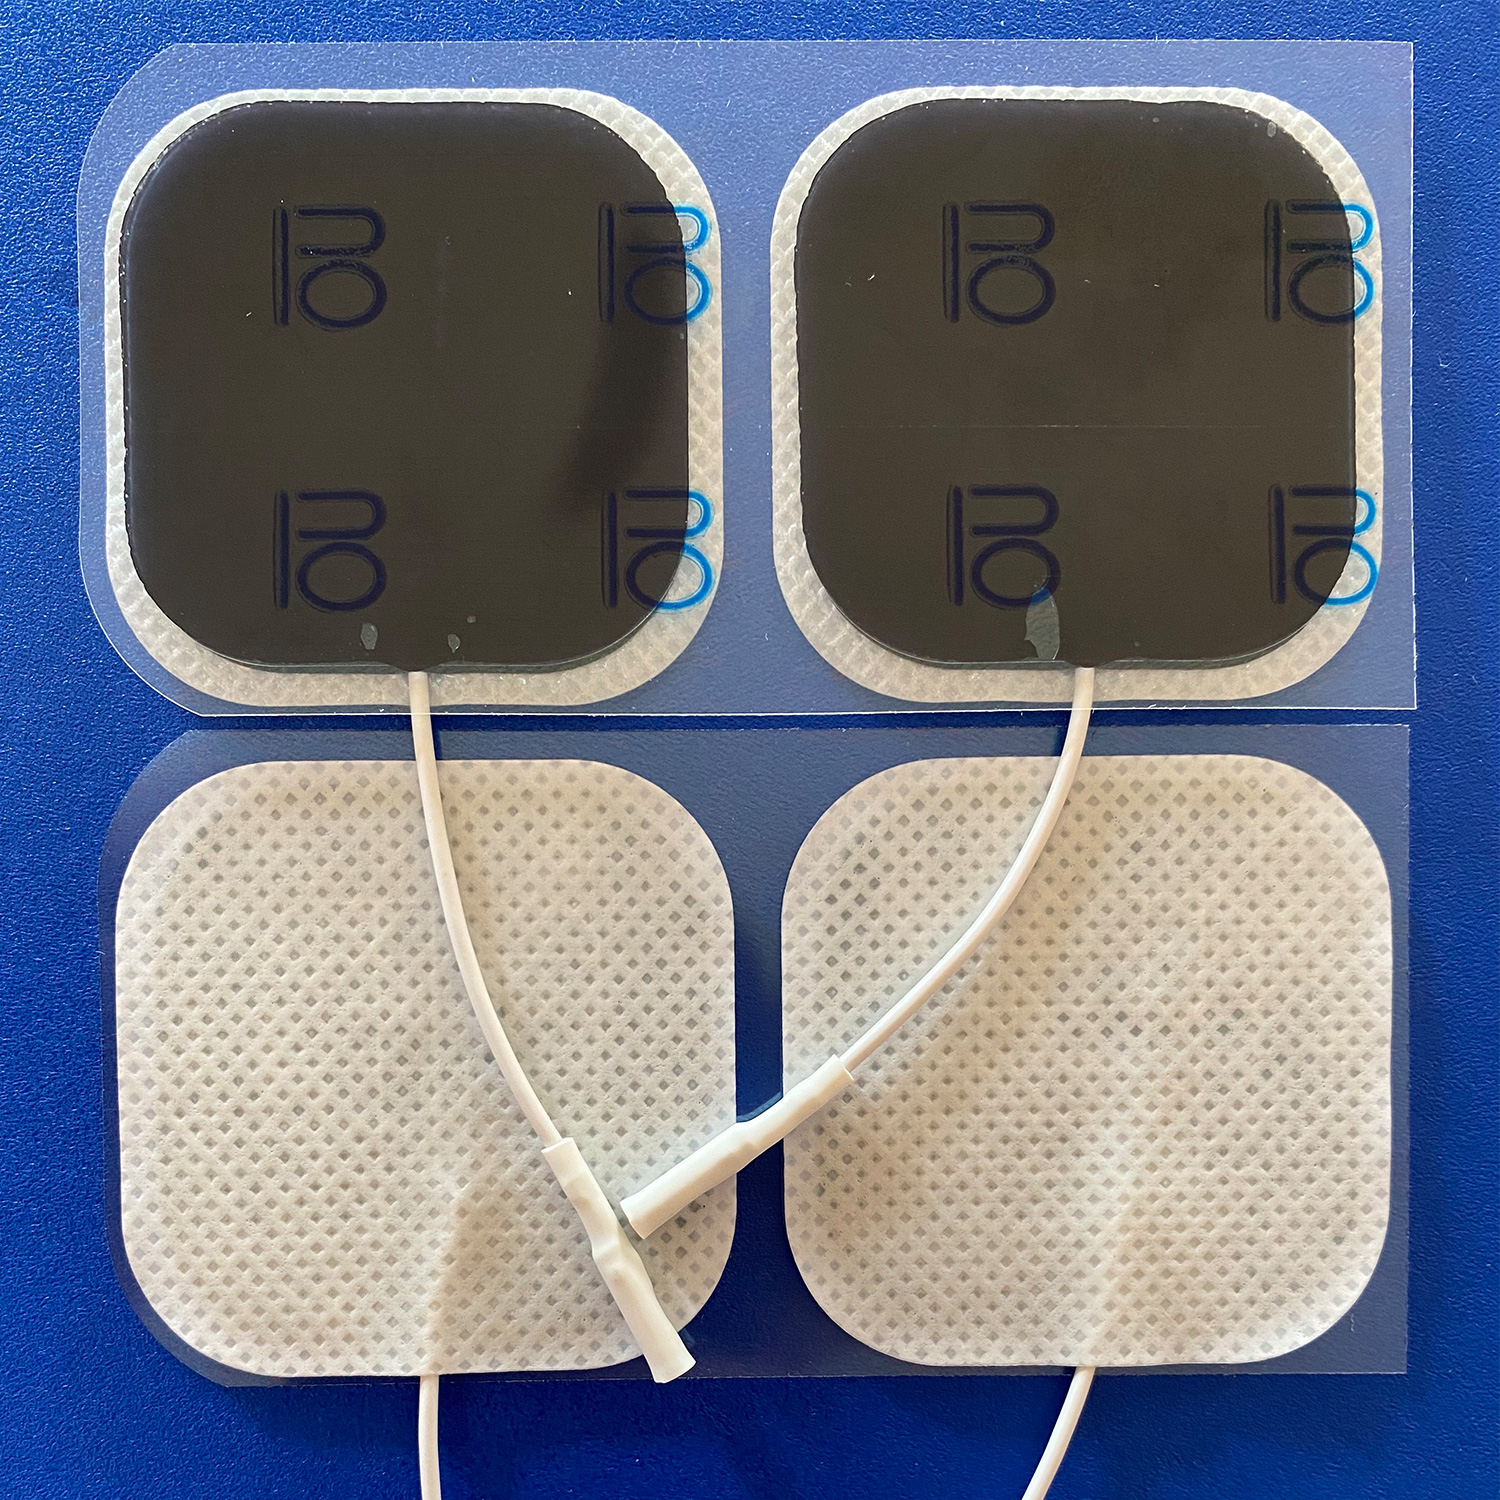 Electrodes : Placement and Preparation